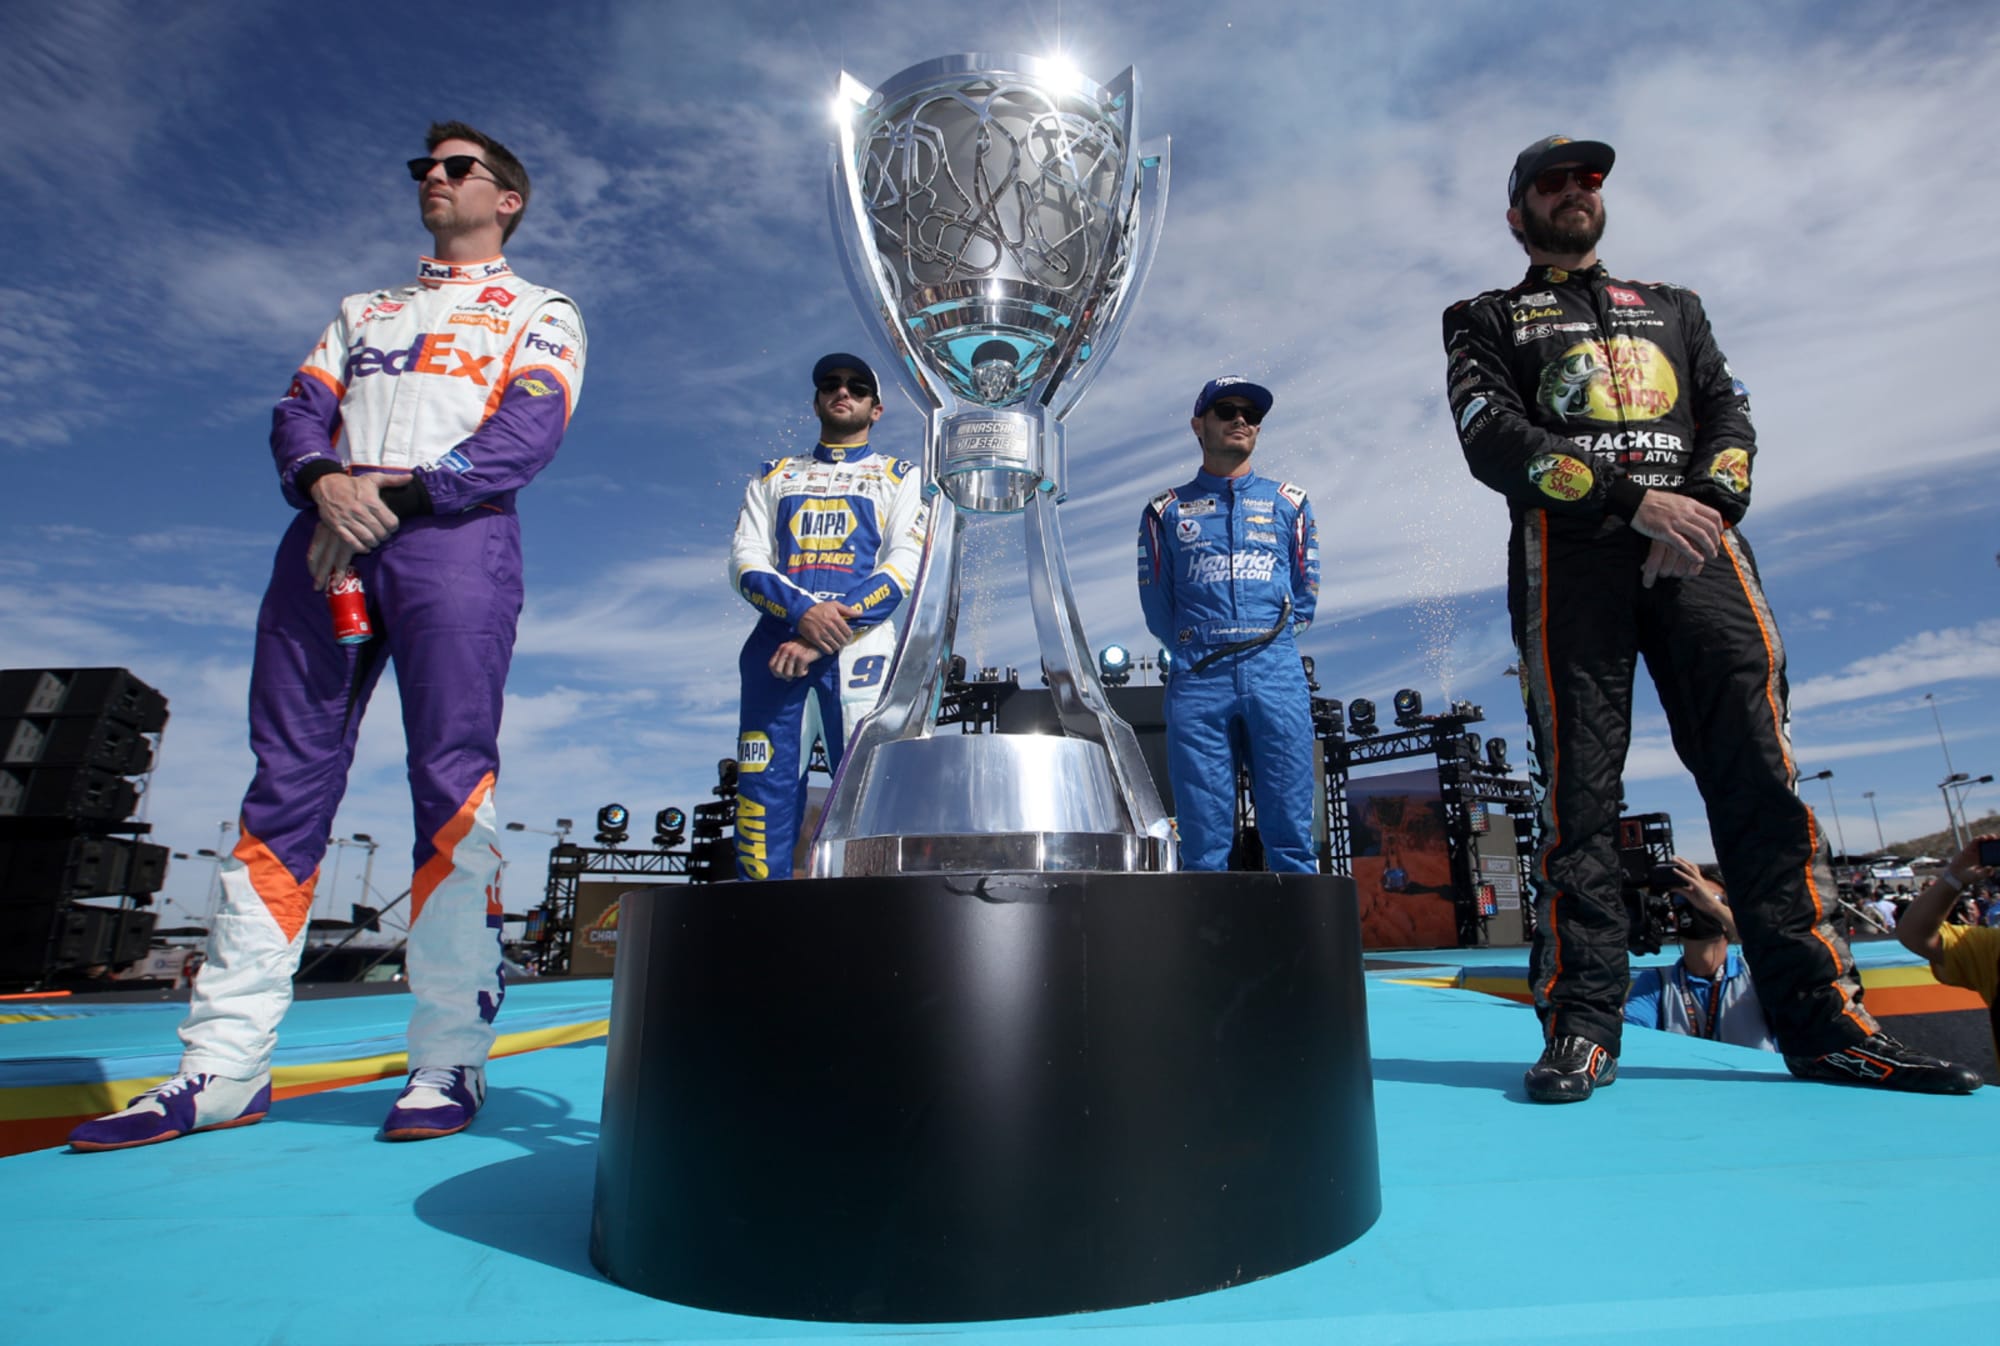 Full NASCAR point standings for 2021 if there were no playoffs